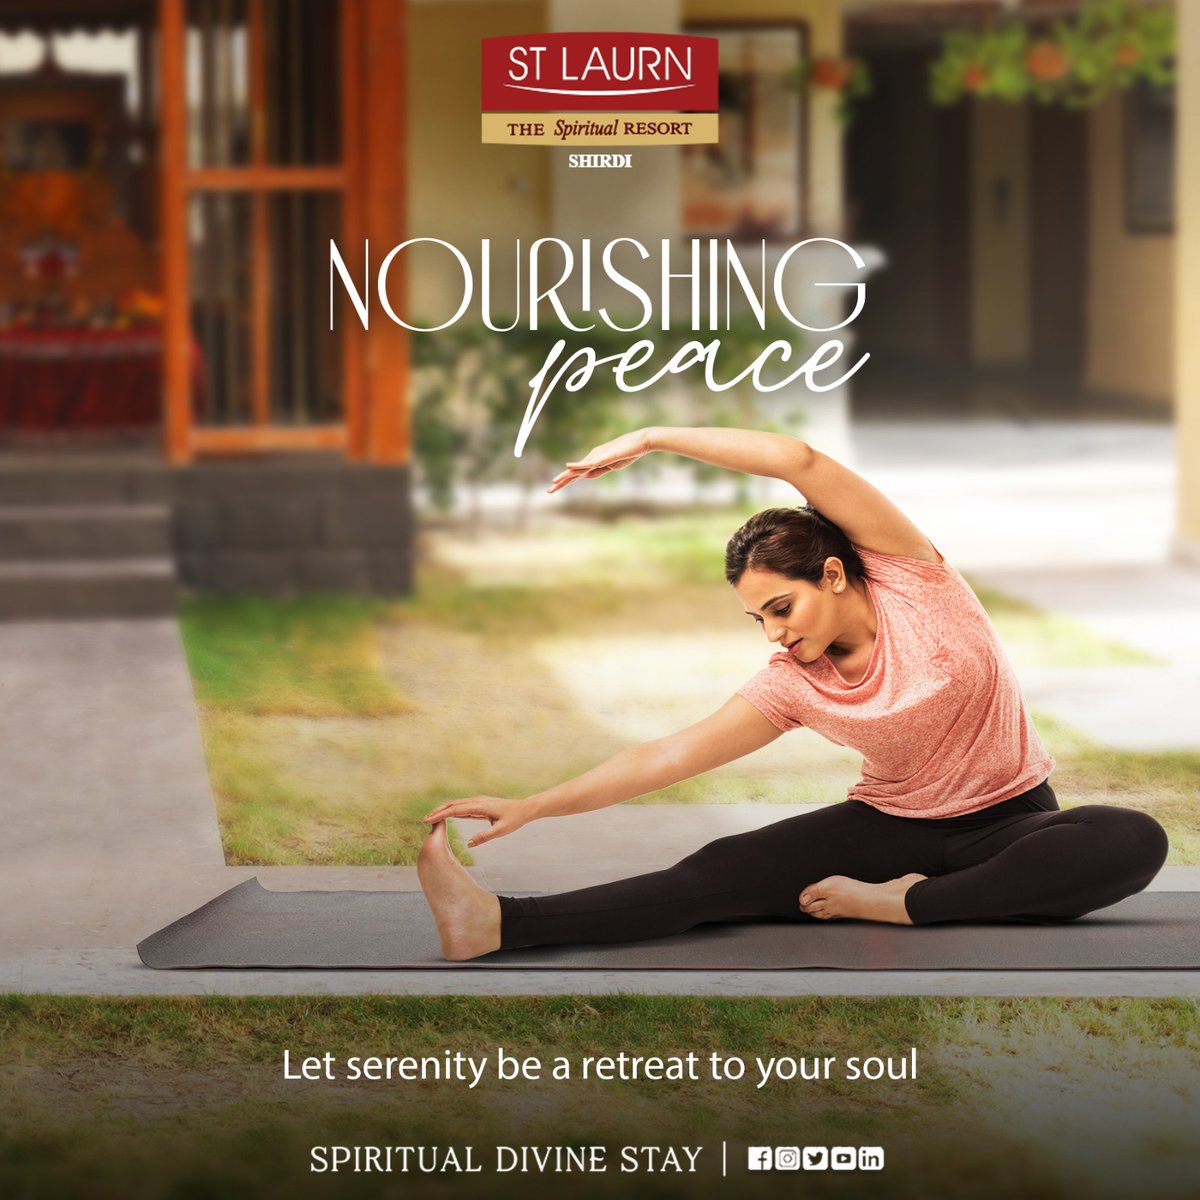 Let serenity embrace your soul at St Laurn - Shirdi 🌟 #SoulRetreat #SerenitySeekers #StLaurnShirdi #TranquilEscapes #DivineJourney #SpiritualGetaway #PeacefulMoments #TravelBliss

check in at St Laurn - The Spiritual Resort, Shirdi.
Phone: 8484085123 / 02423 255950